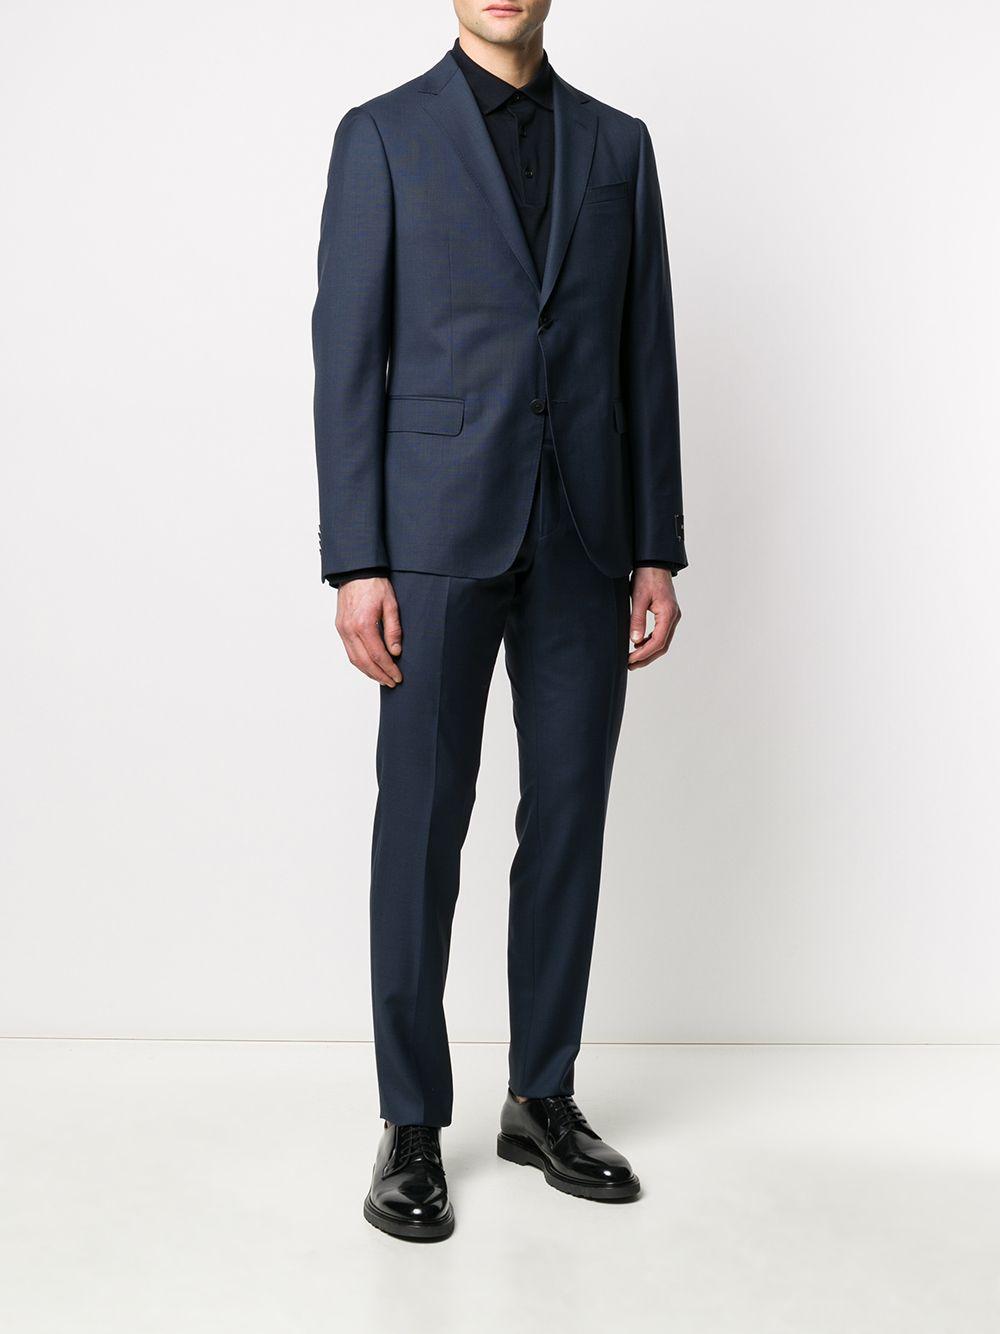 Z Zegna Single Breasted Wool Suit in Blue for Men - Lyst